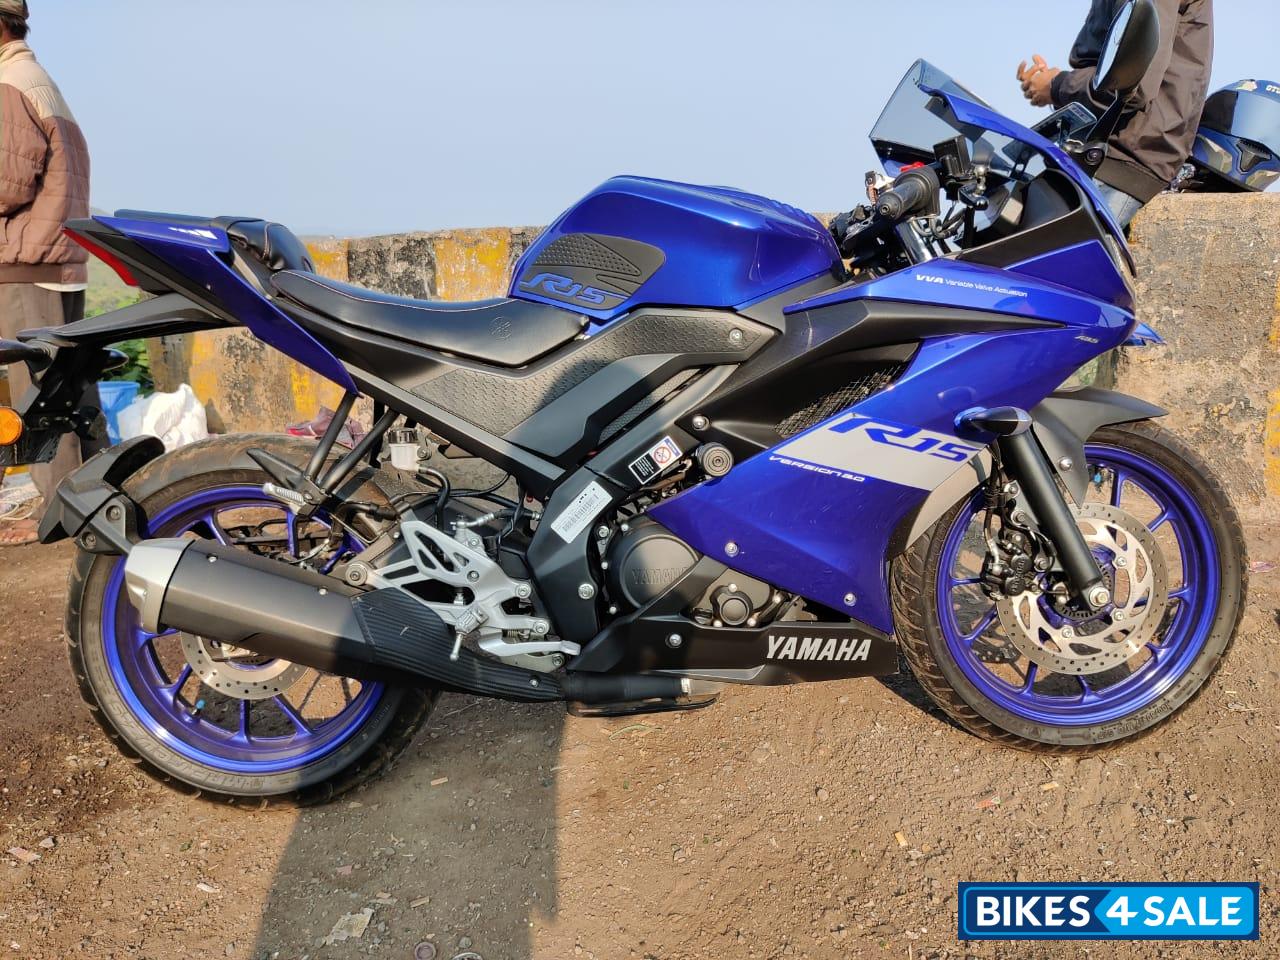 Used 2020 model Yamaha YZF R15 V3 BS6 for sale in Pune. ID 308810. Racing Blue colour - Bikes4Sale